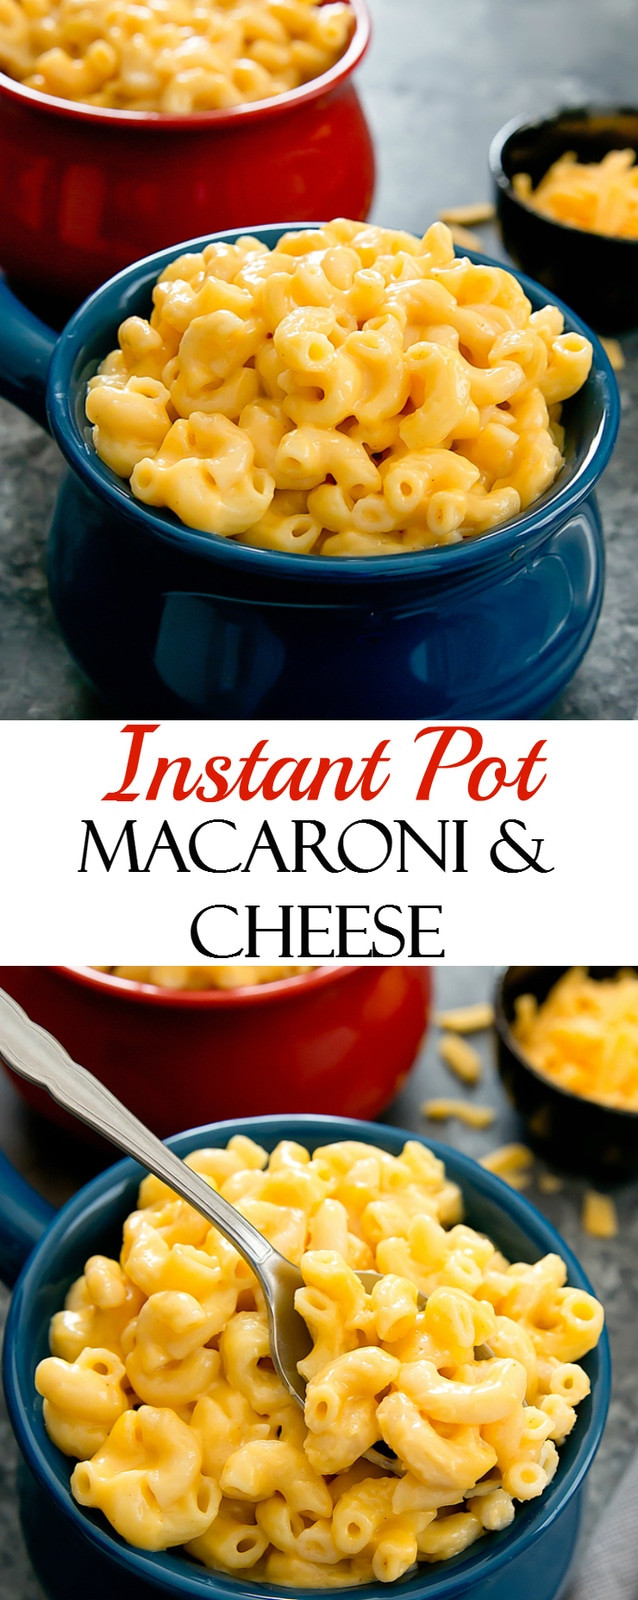 Instant Pot Recipes Mac And Cheese
 Instant Pot Macaroni and Cheese Kirbie s Cravings